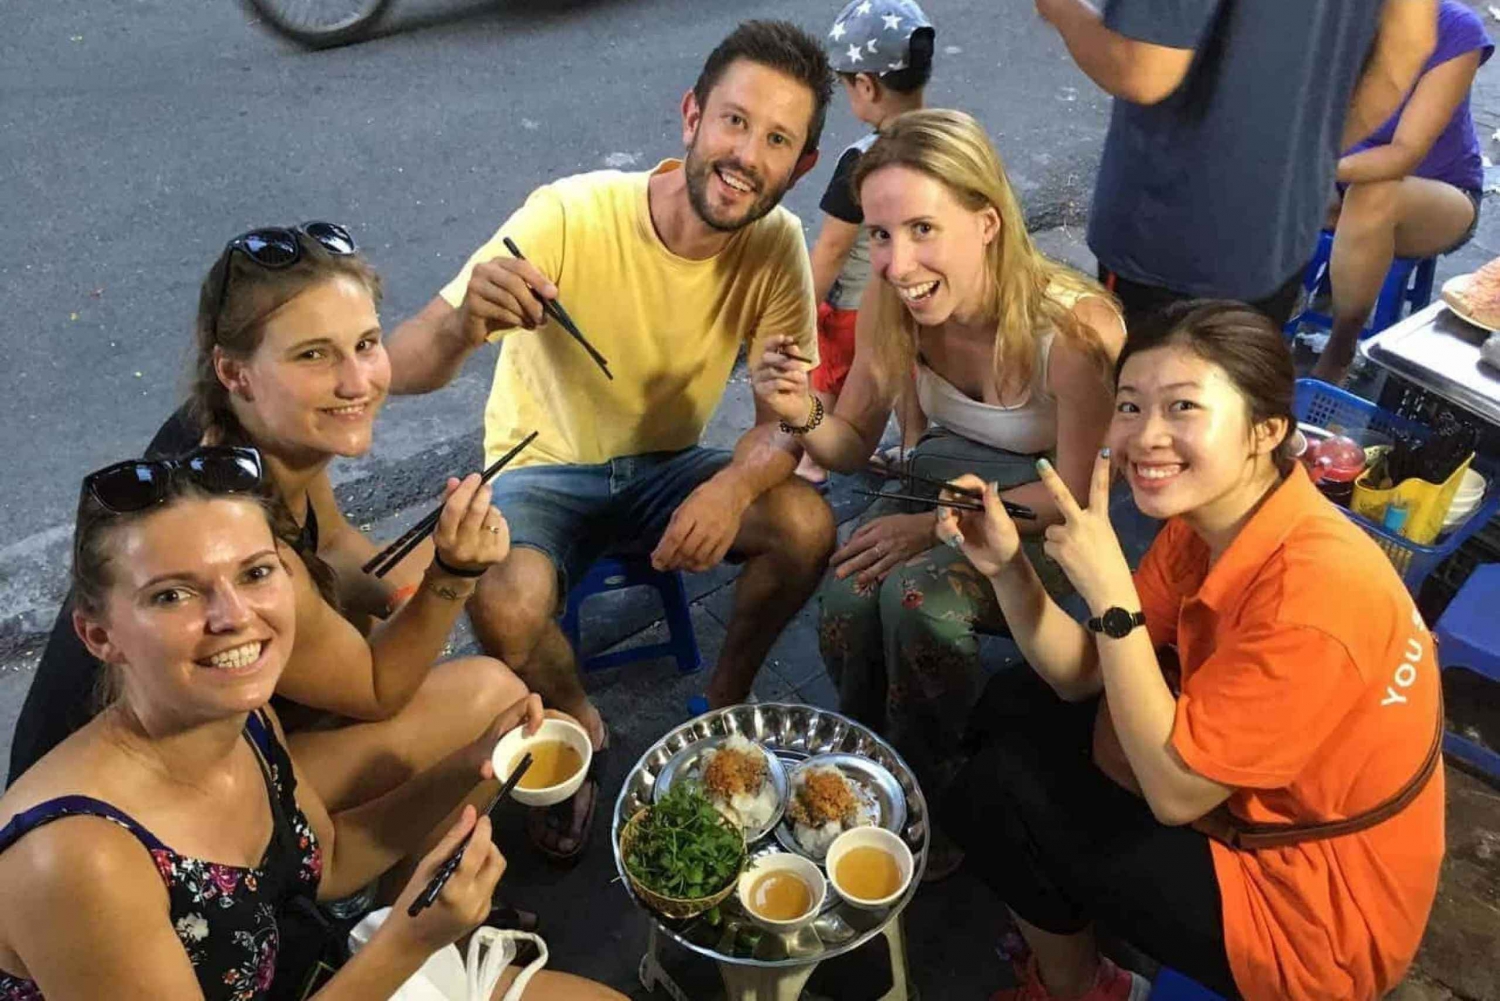 Hanoi: Vietnamese Street Food Tour with Local Guide